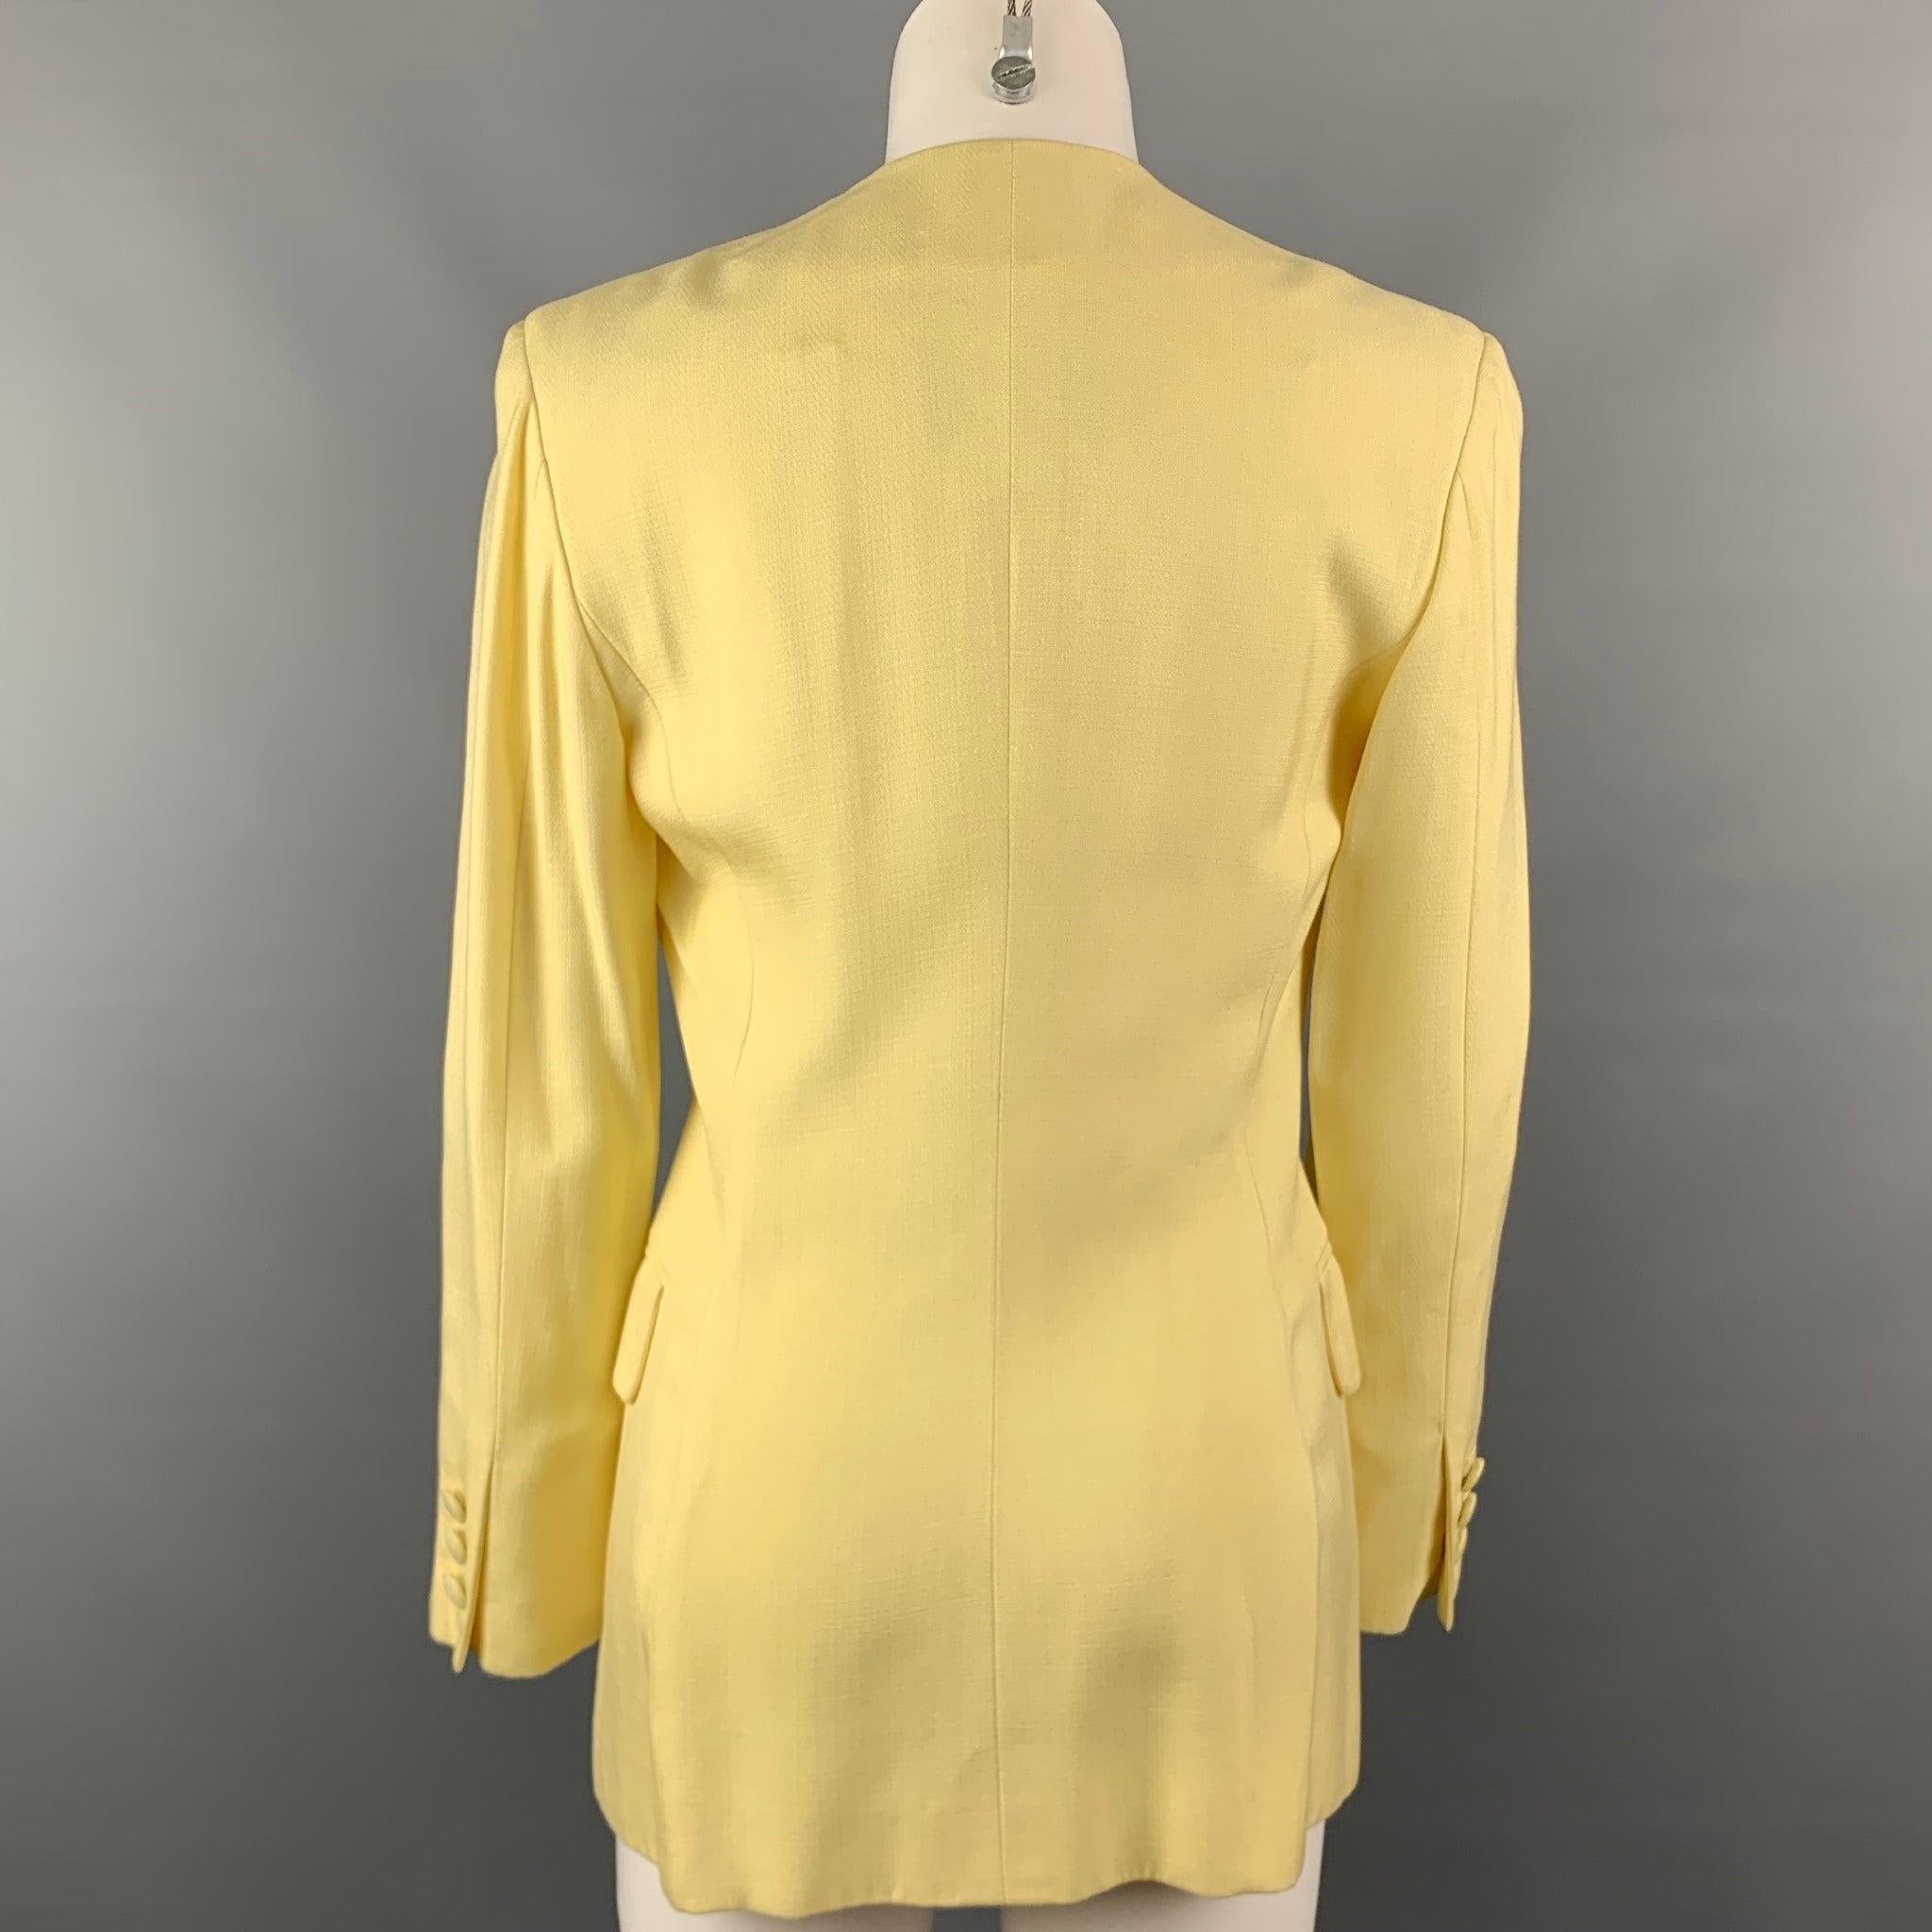 Women's Vintage MOSCHINO COUTURE Size 8 Yellow Acetate Blend Jacket